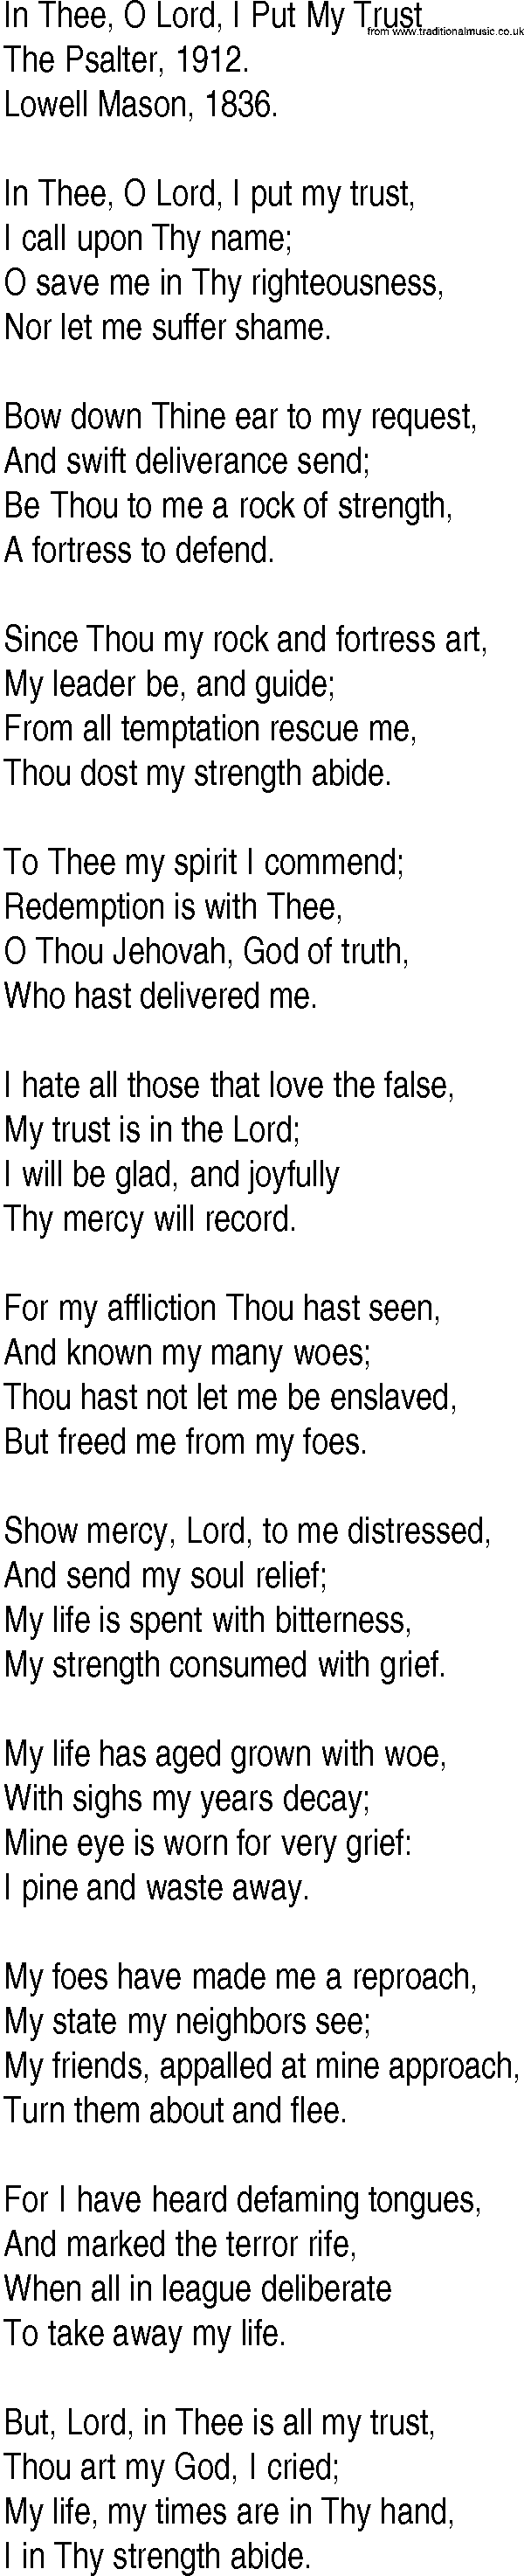 Hymn and Gospel Song: In Thee, O Lord, I Put My Trust by The Psalter 31 lyrics